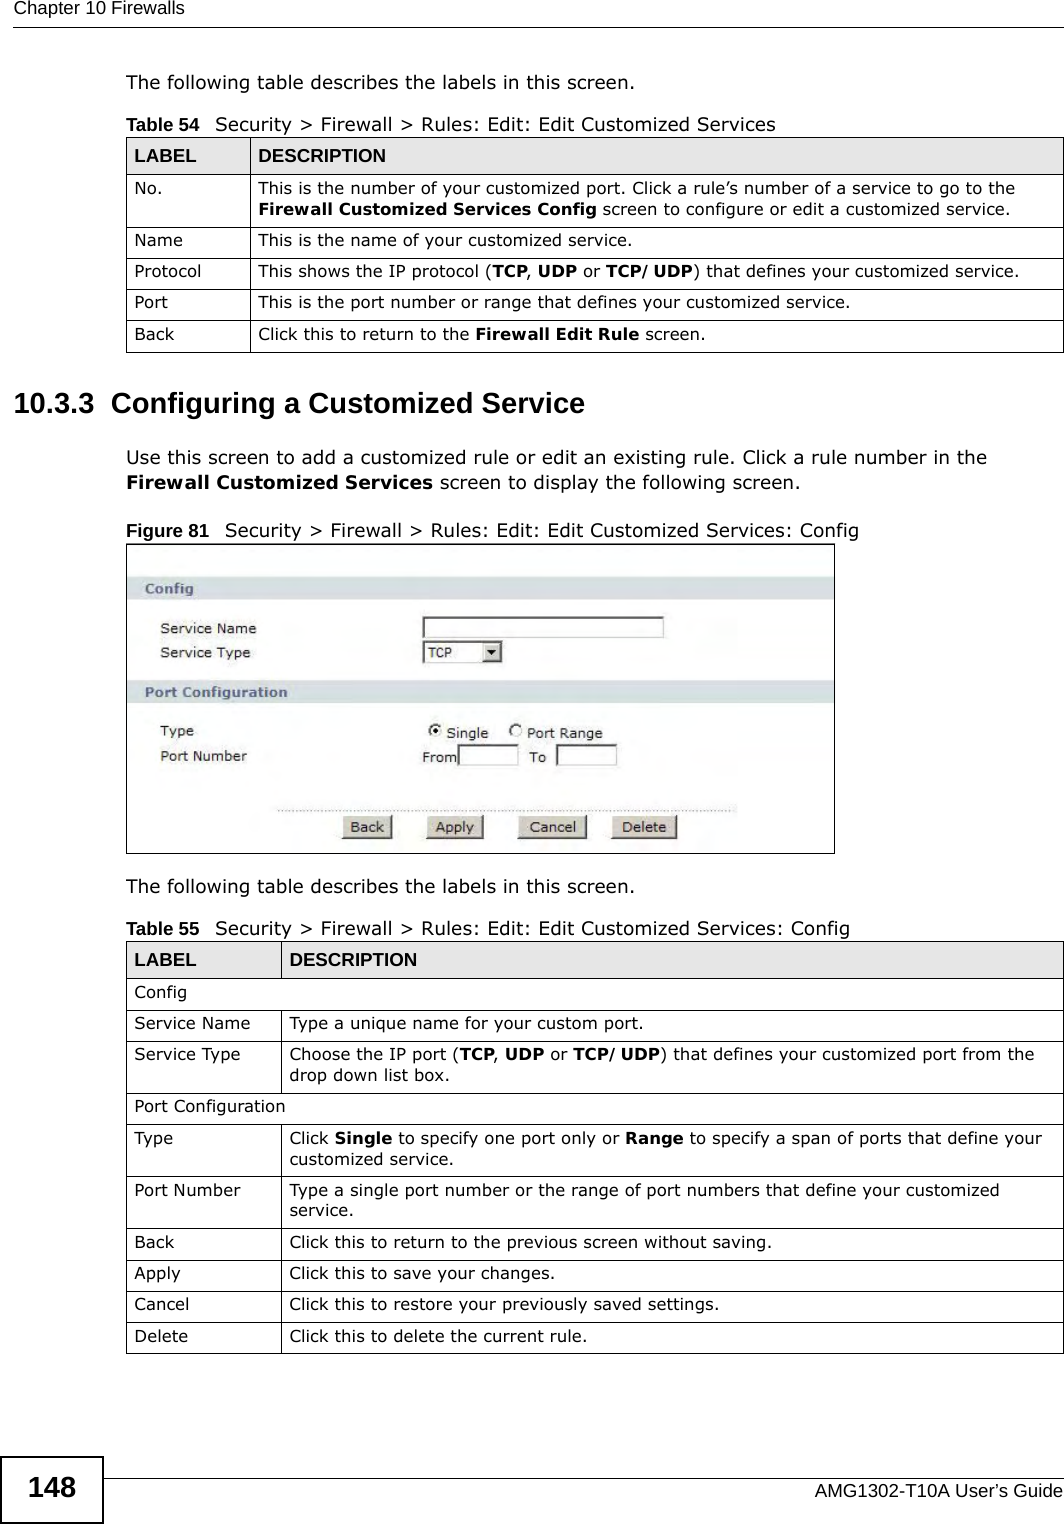 Chapter 10 FirewallsAMG1302-T10A User’s Guide148The following table describes the labels in this screen. 10.3.3  Configuring a Customized Service  Use this screen to add a customized rule or edit an existing rule. Click a rule number in the Firewall Customized Services screen to display the following screen.Figure 81   Security &gt; Firewall &gt; Rules: Edit: Edit Customized Services: ConfigThe following table describes the labels in this screen.Table 54   Security &gt; Firewall &gt; Rules: Edit: Edit Customized ServicesLABEL DESCRIPTIONNo. This is the number of your customized port. Click a rule’s number of a service to go to the Firewall Customized Services Config screen to configure or edit a customized service.Name This is the name of your customized service.Protocol This shows the IP protocol (TCP, UDP or TCP/UDP) that defines your customized service.Port This is the port number or range that defines your customized service.Back Click this to return to the Firewall Edit Rule screen.Table 55   Security &gt; Firewall &gt; Rules: Edit: Edit Customized Services: ConfigLABEL DESCRIPTIONConfigService Name Type a unique name for your custom port.Service Type Choose the IP port (TCP, UDP or TCP/UDP) that defines your customized port from the drop down list box.Port ConfigurationType Click Single to specify one port only or Range to specify a span of ports that define your customized service. Port Number Type a single port number or the range of port numbers that define your customized service.Back Click this to return to the previous screen without saving.Apply Click this to save your changes.Cancel Click this to restore your previously saved settings.Delete Click this to delete the current rule.